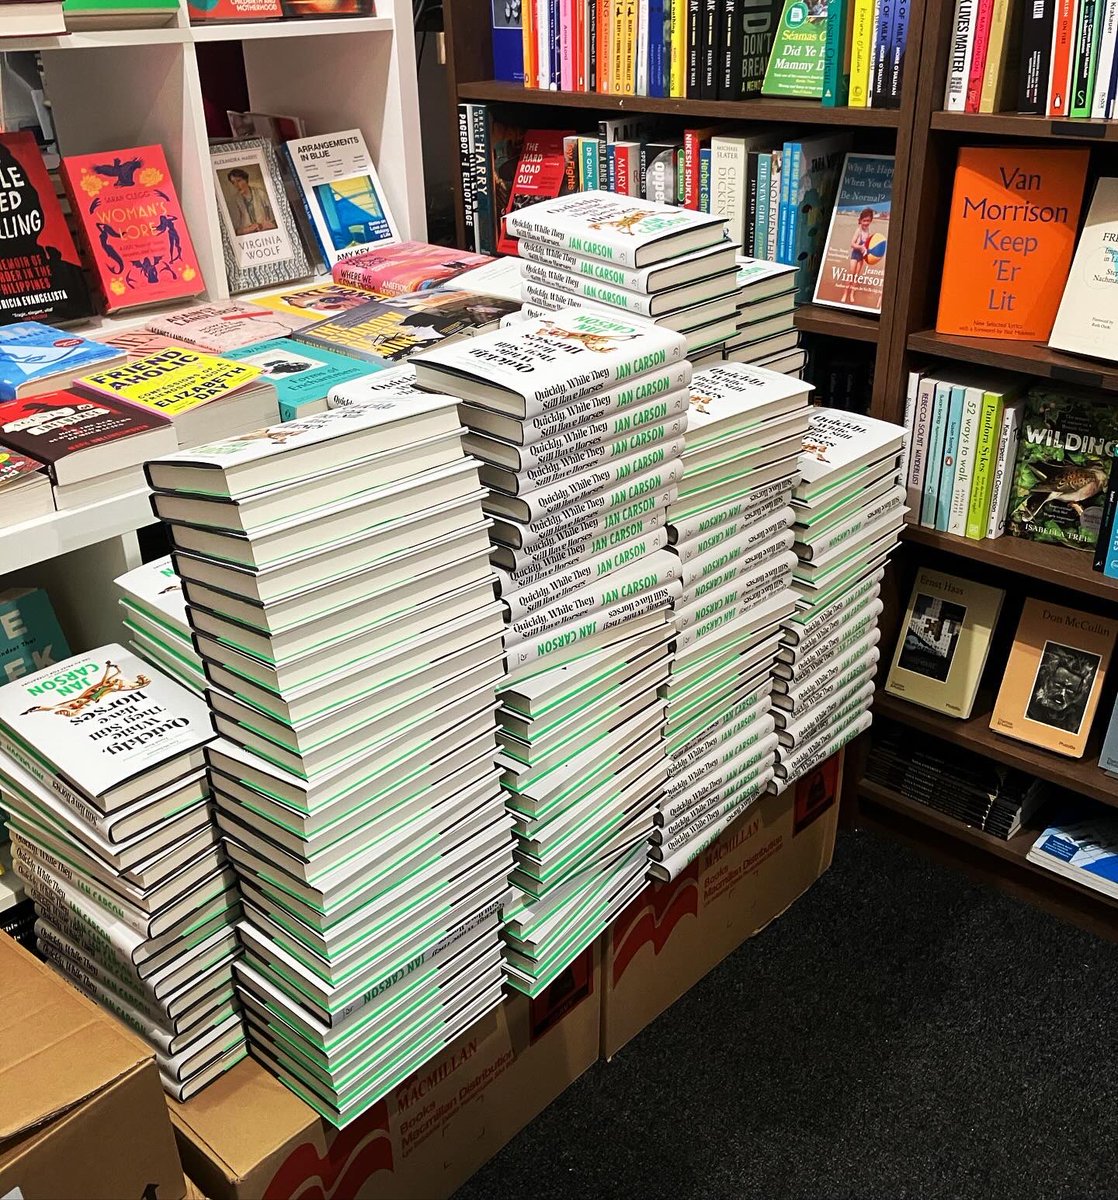 Pre-signing a few of the absolute wall of #quicklywhiletheystillhavehorses @NOALIBISBOOKS this morning. There is literally nowhere which feels more like a second home/safety net/cheerleading squad than No Alibis.